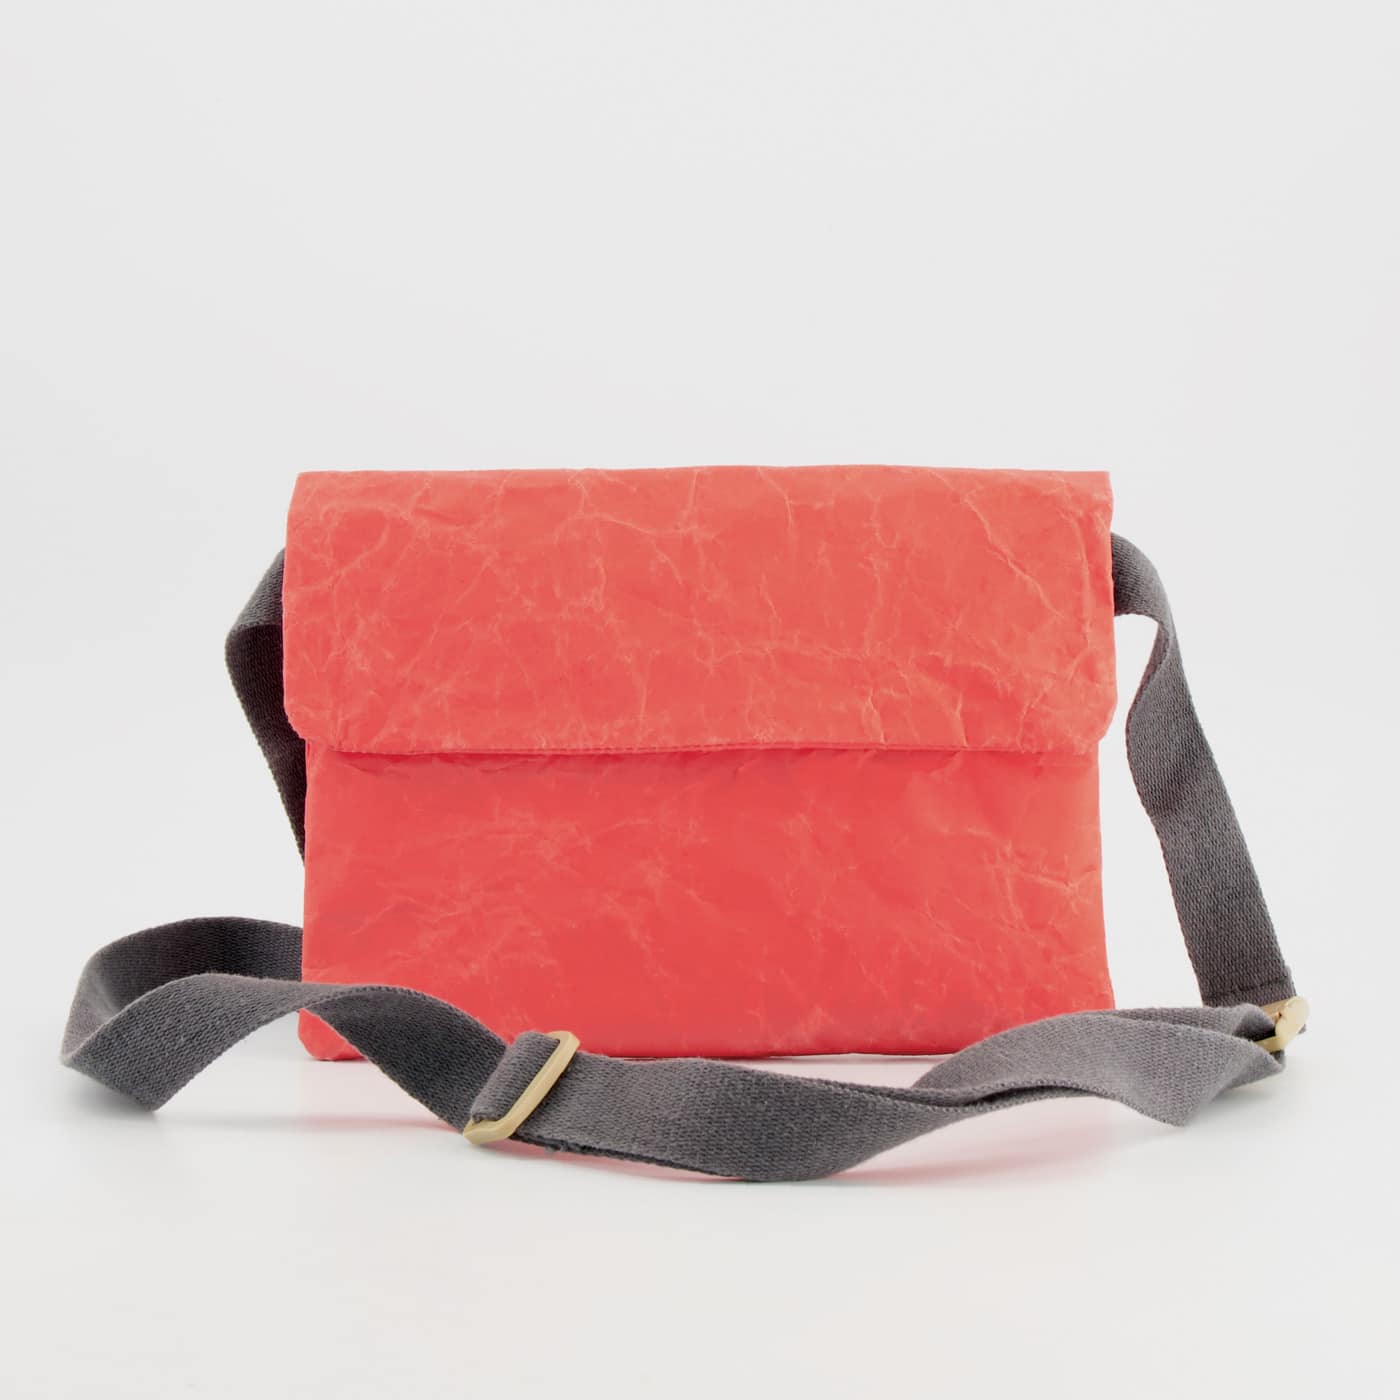 The Wren Design - Recycled cement paper bags, sleeves and accessories